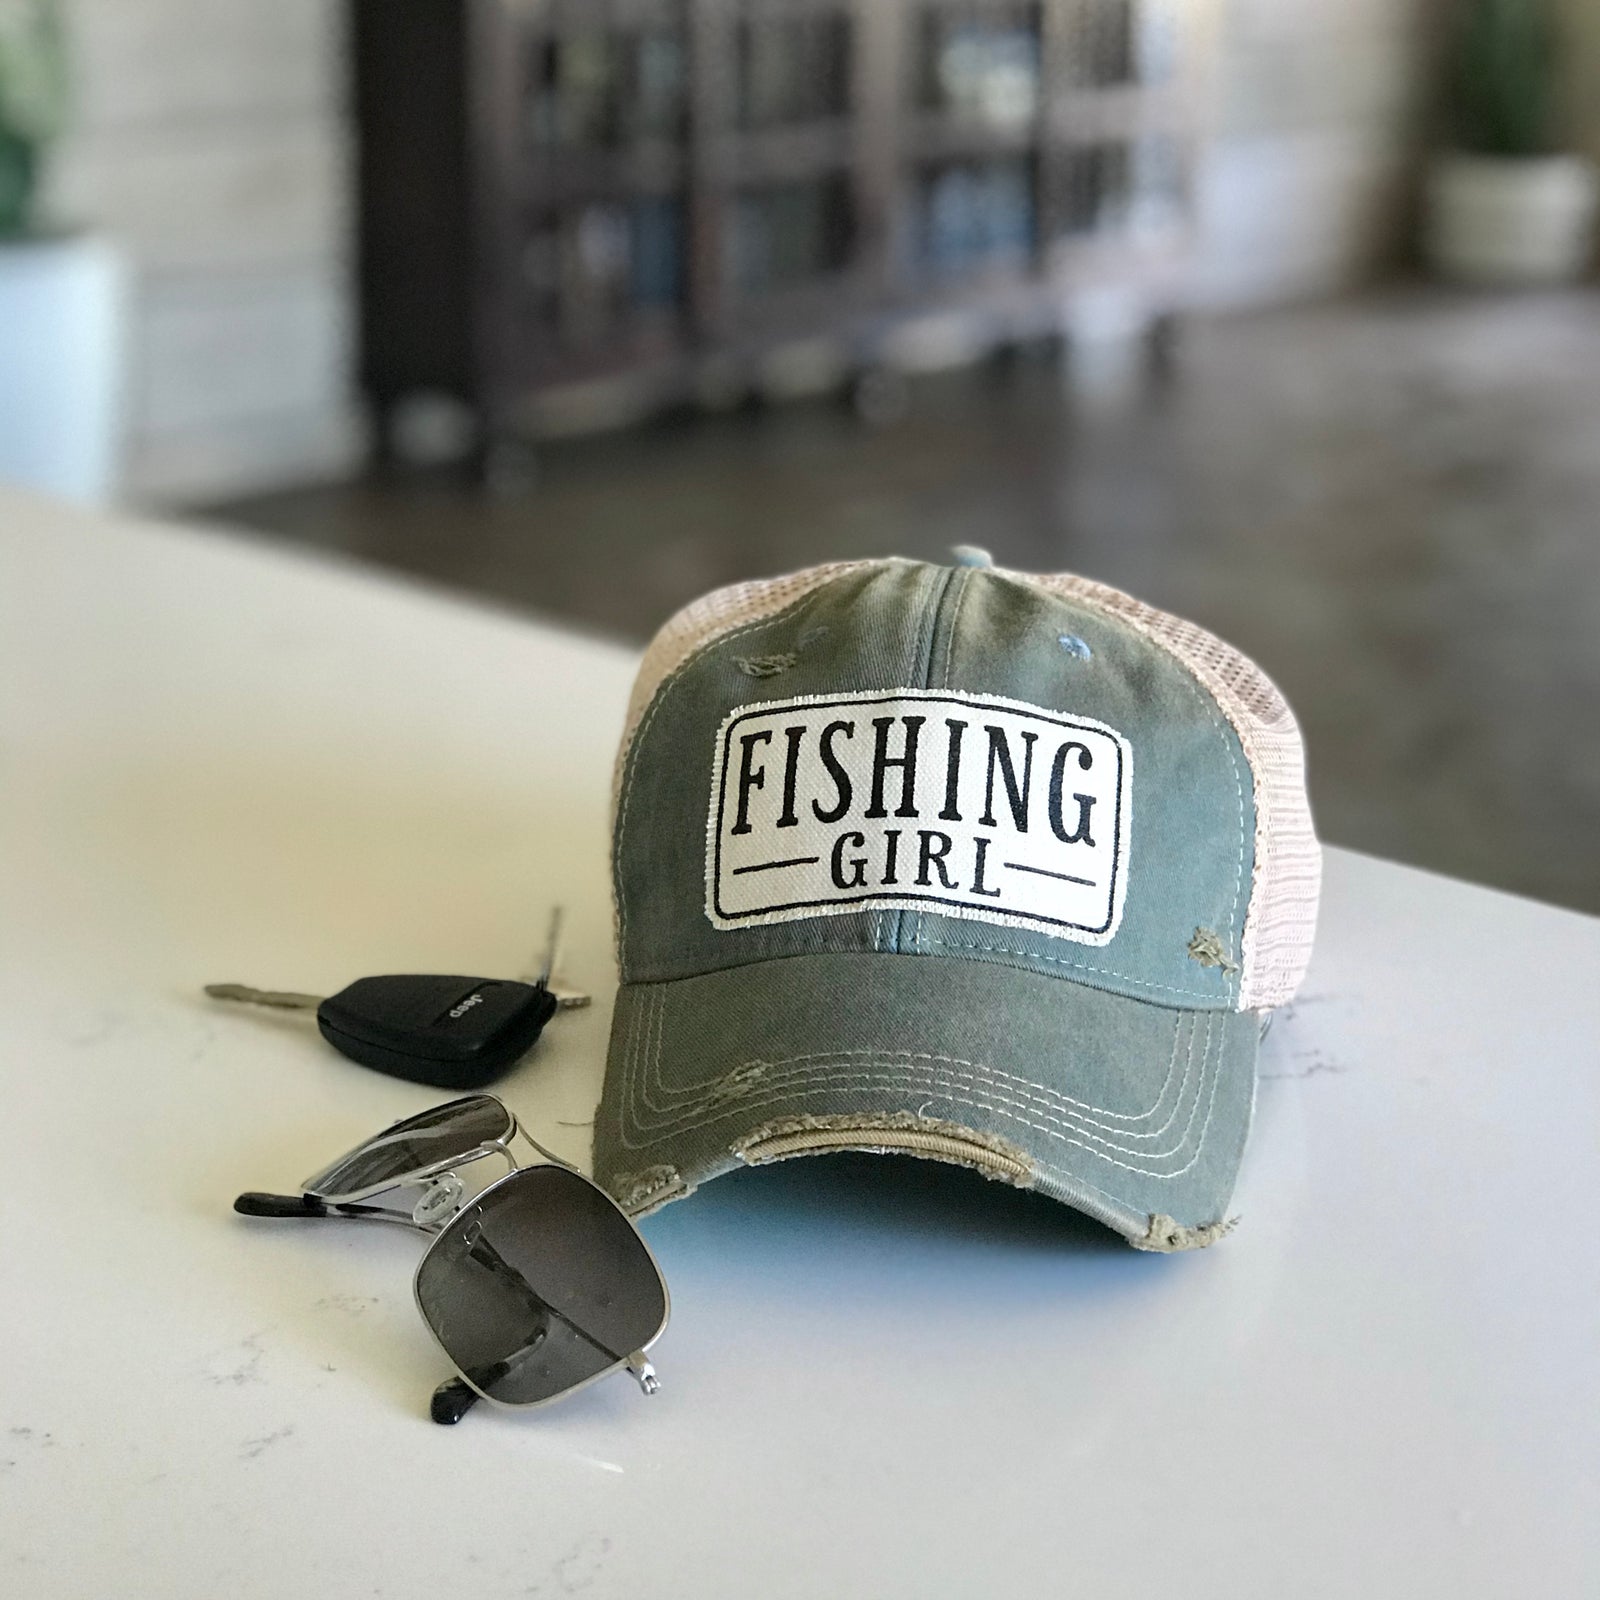 shop all hats Tagged fishing girl - Live Happy Co